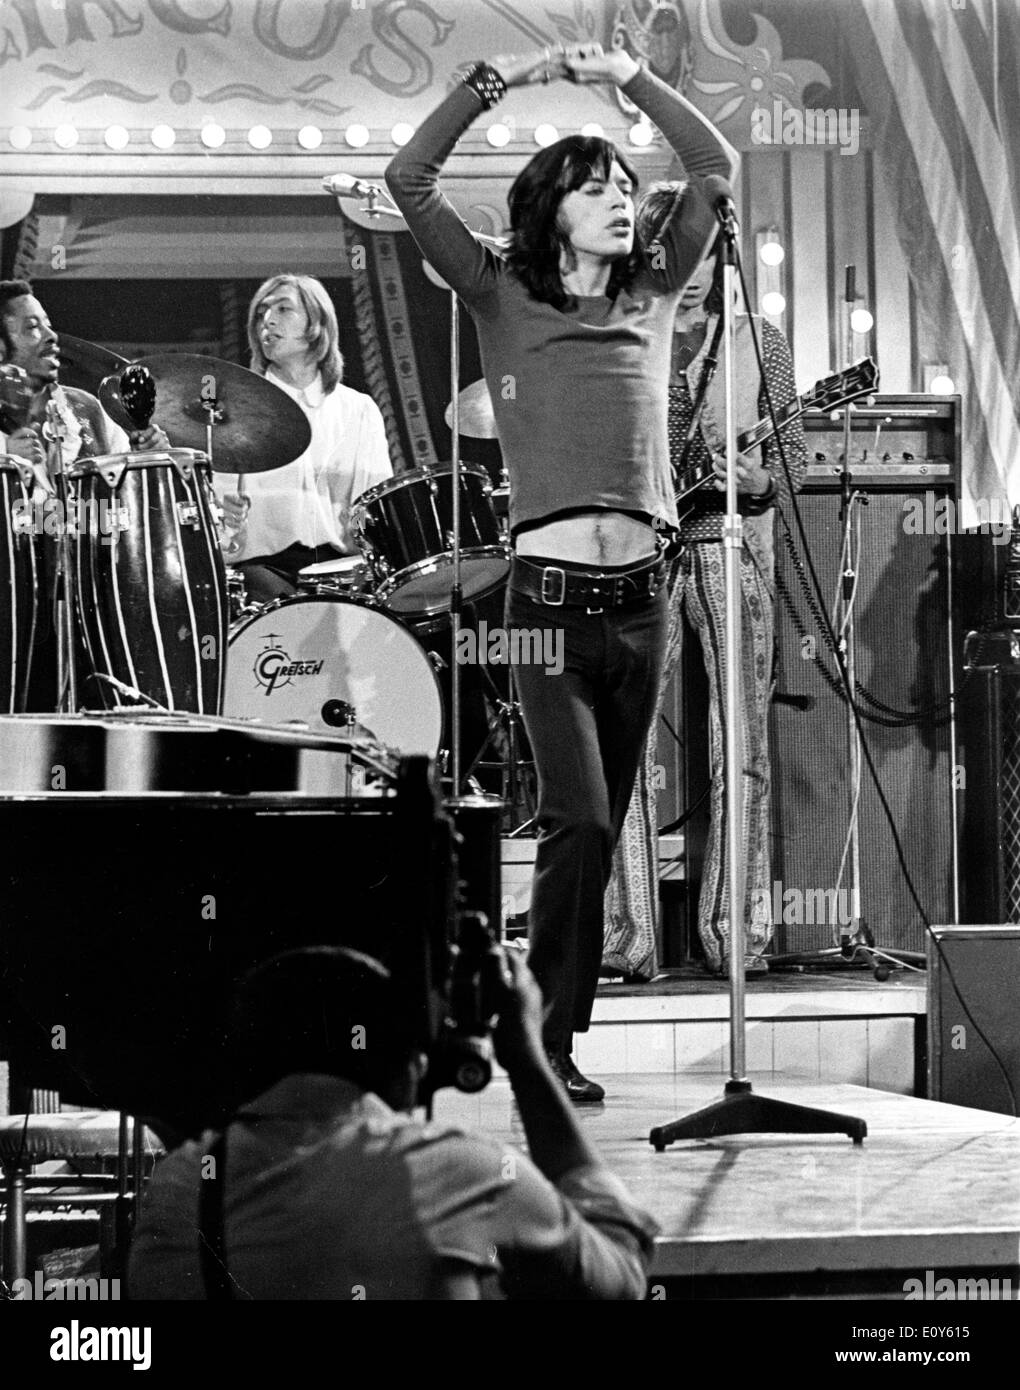 Singer Mick Jagger filming 'Rock 'n' Roll Circus' Stock Photo - Alamy